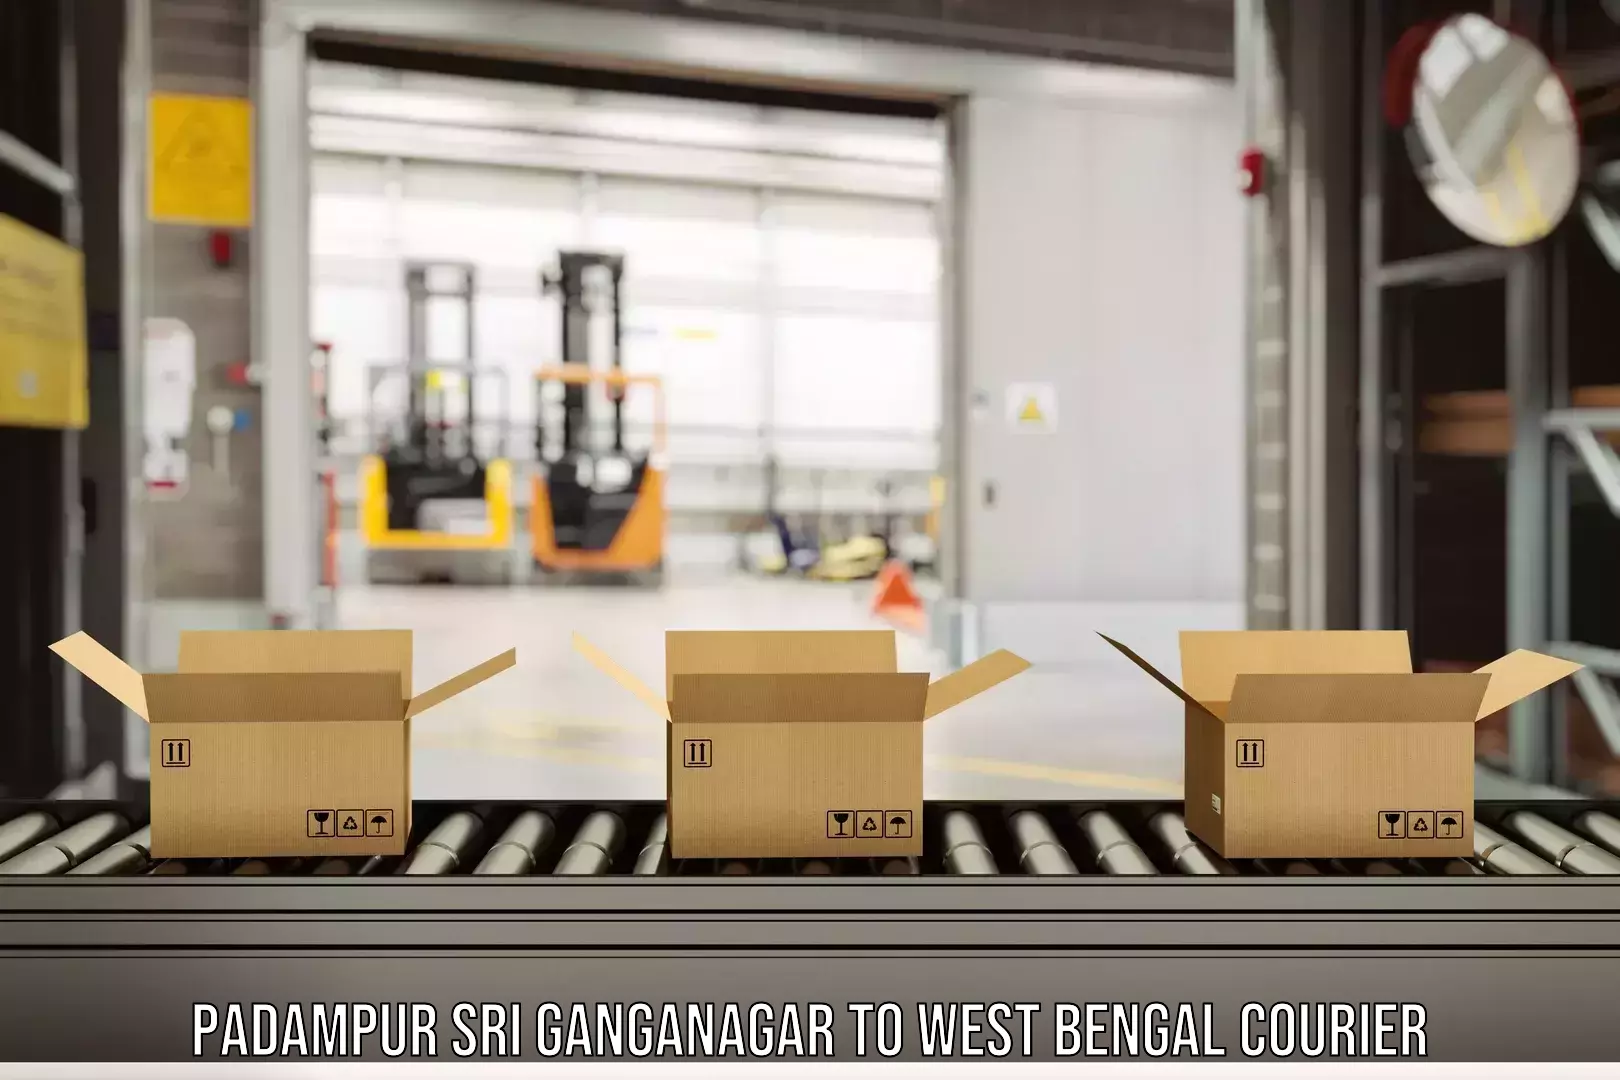 End-to-end delivery Padampur Sri Ganganagar to Rampurhat